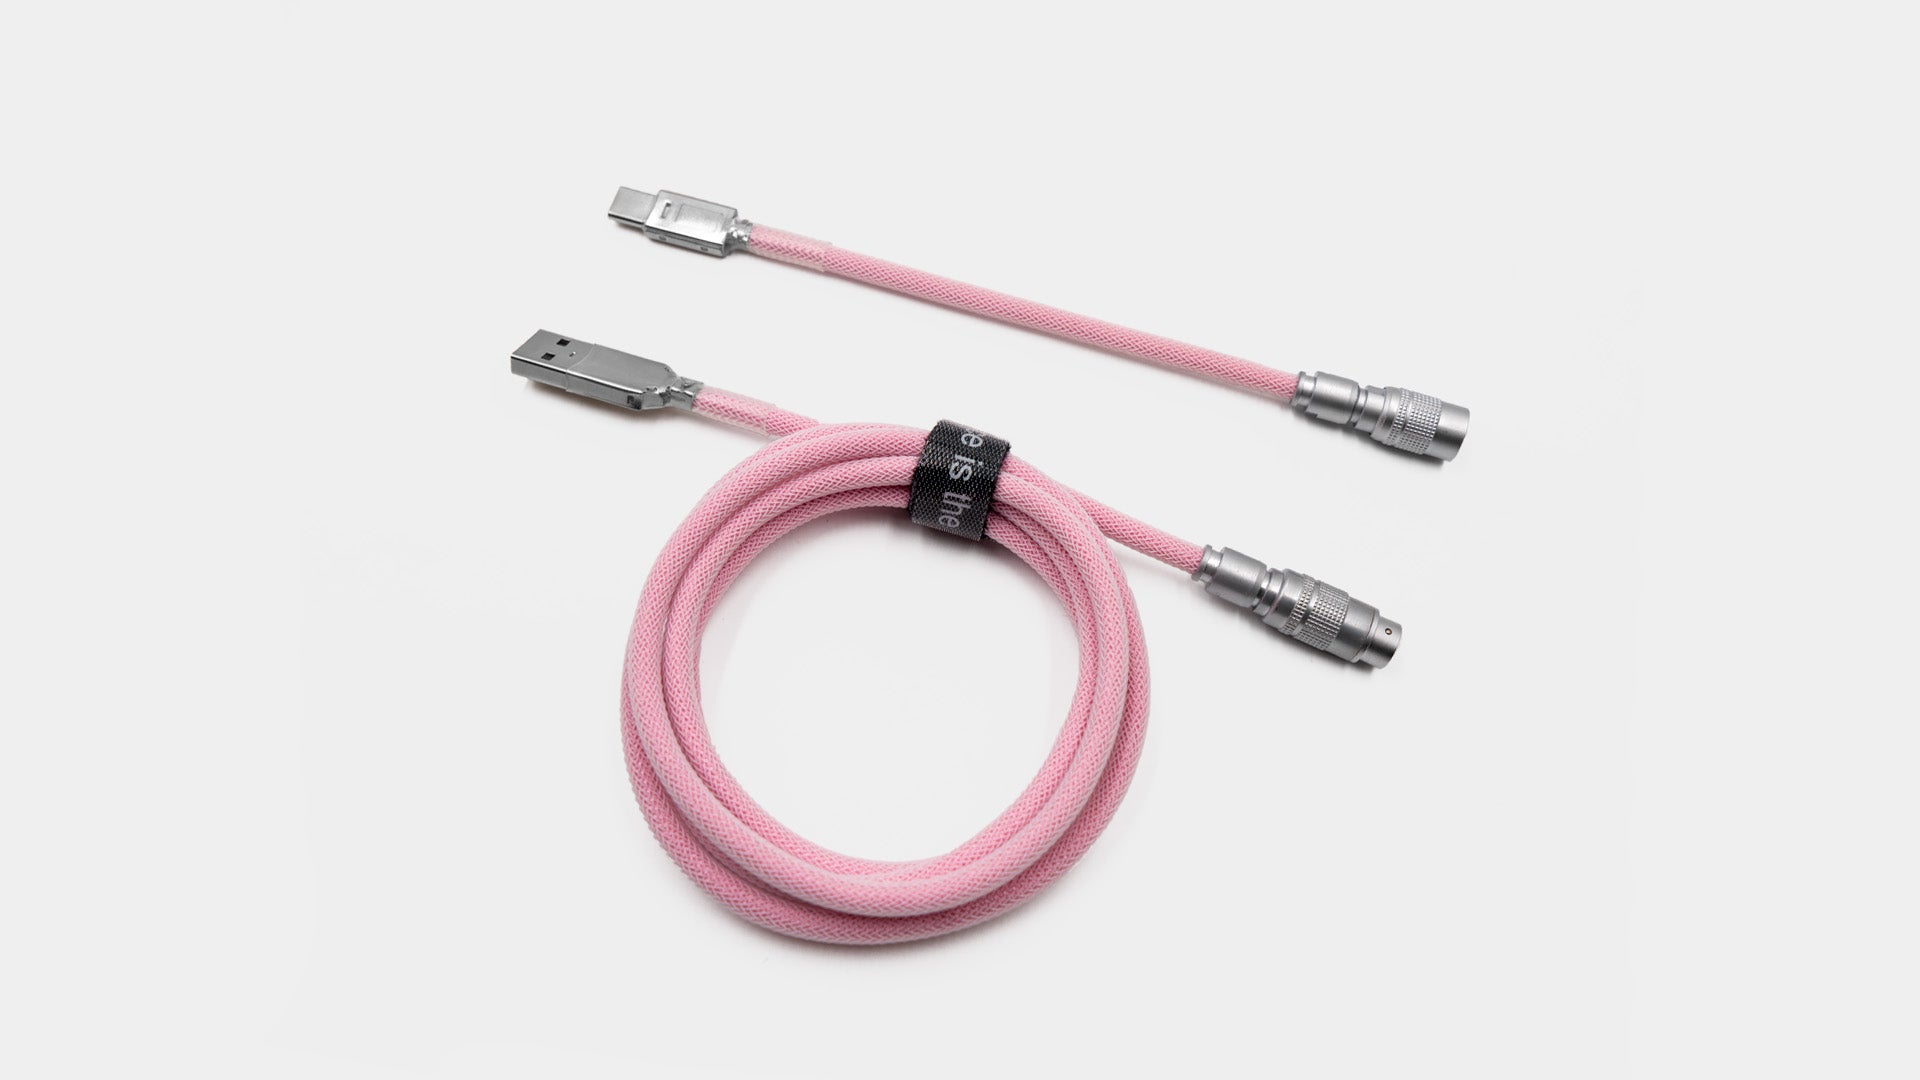 SAKURA DAY YC8 CABLE-Space Cables-coiled keyboard cable-coiled usb c cable-coiled cable keyboard